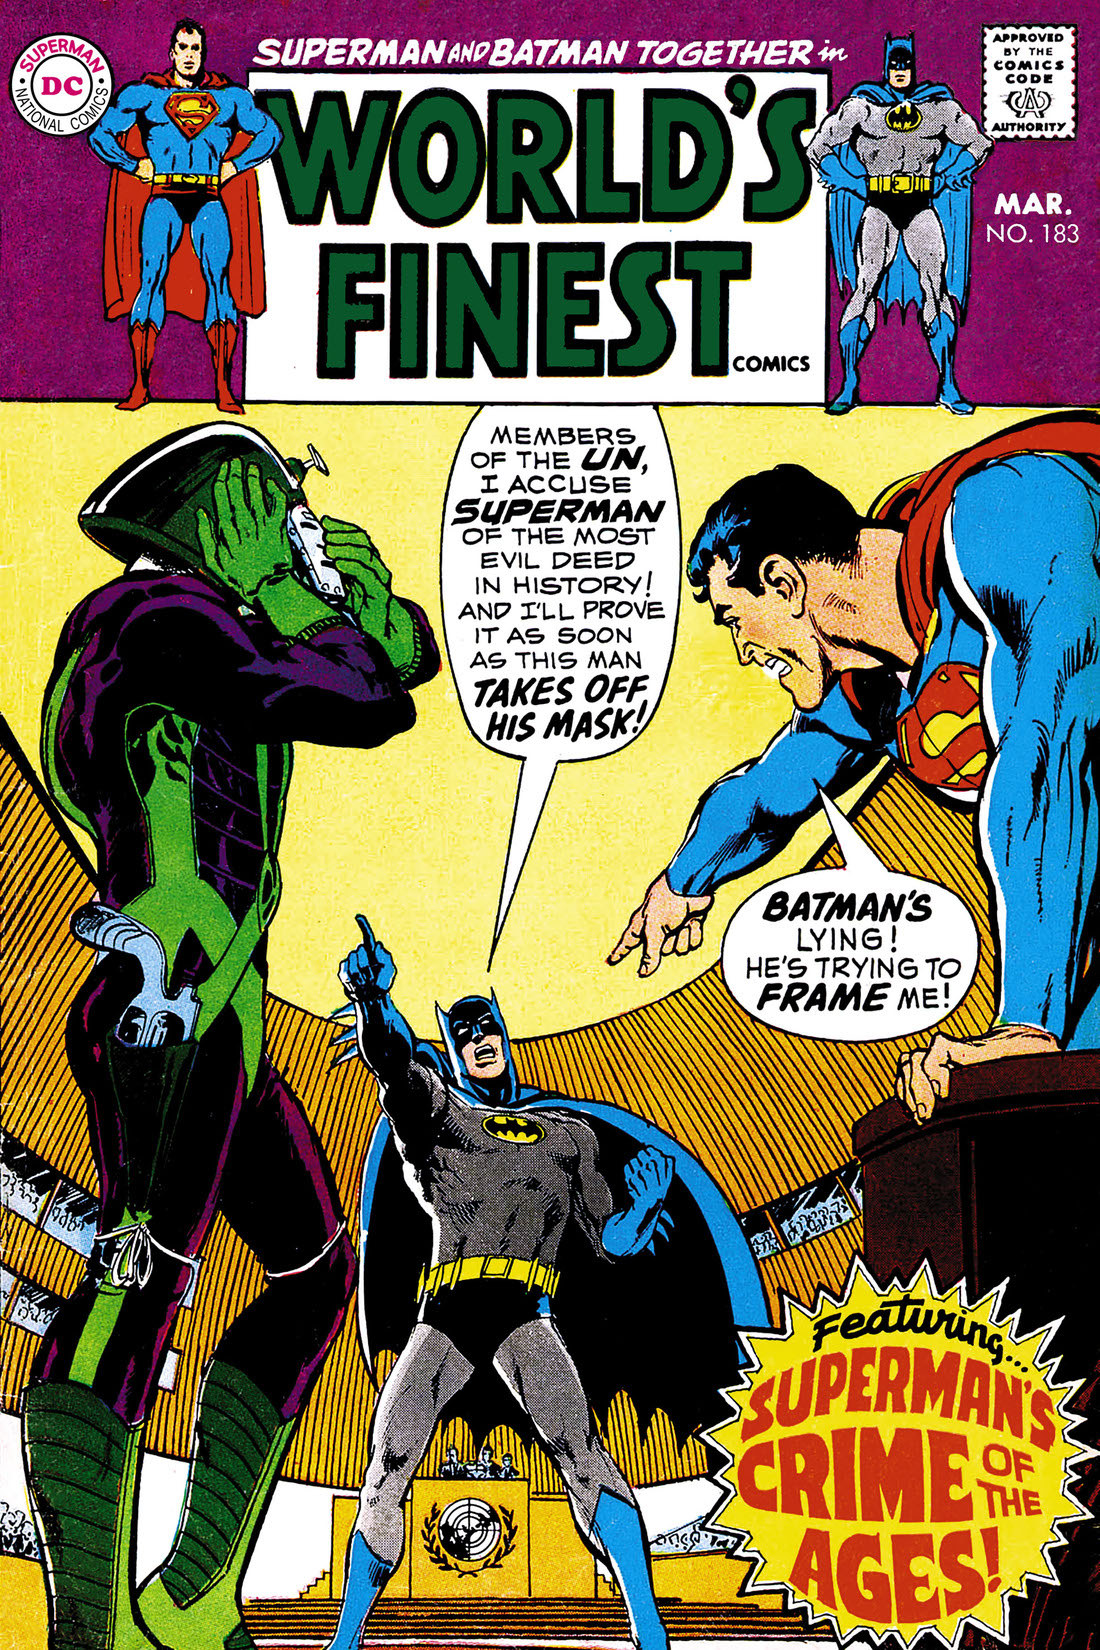 World's Finest Comics (1941-) #183 preview images